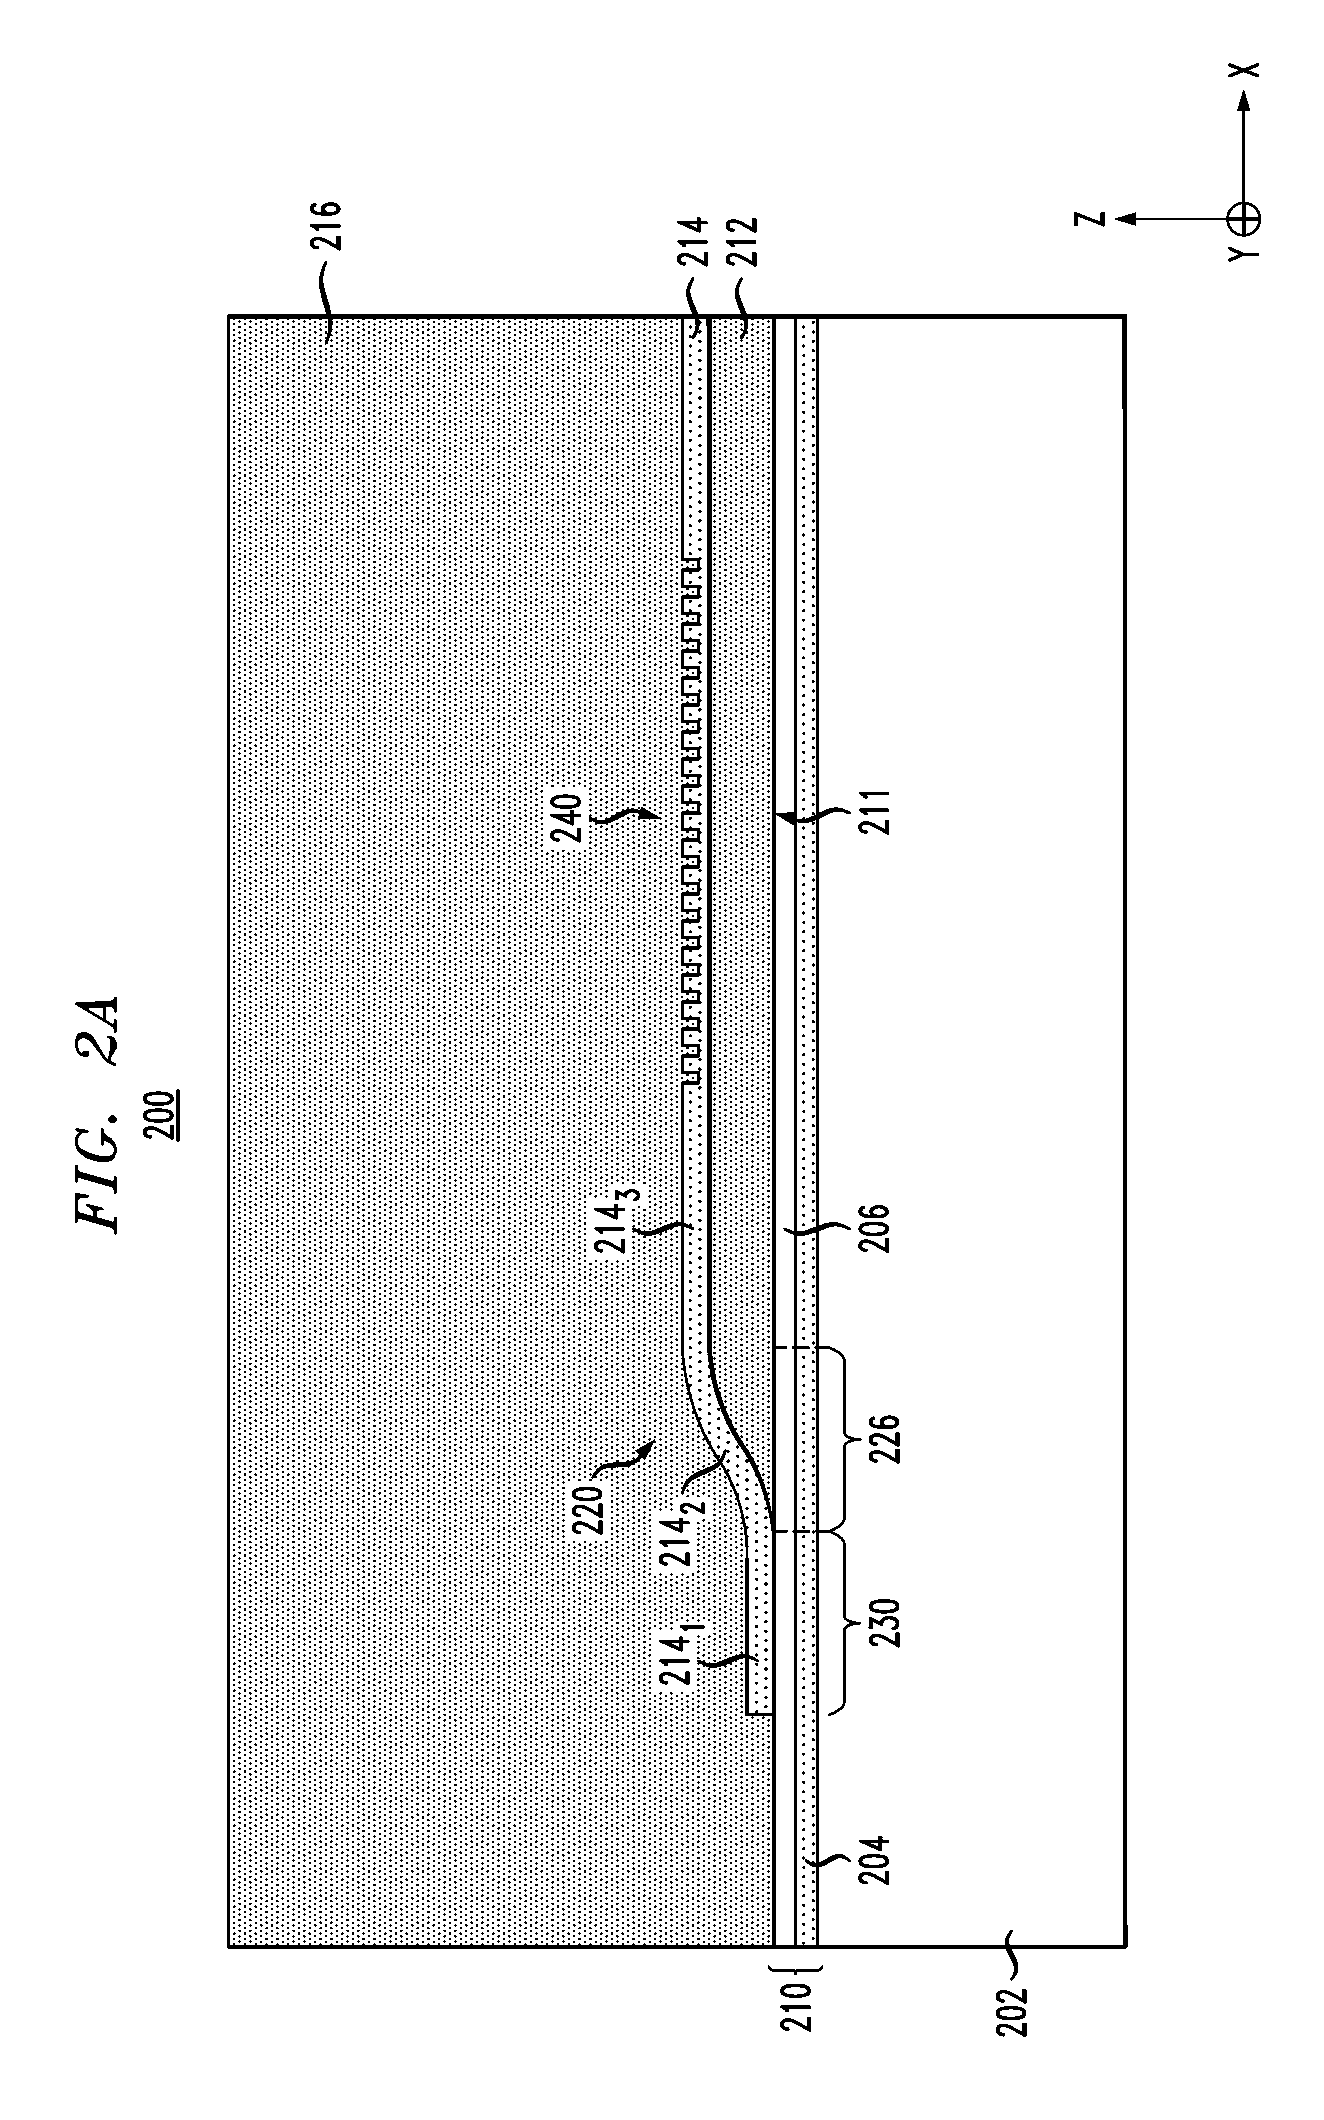 Photonic integrated circuit having a waveguide-grating coupler